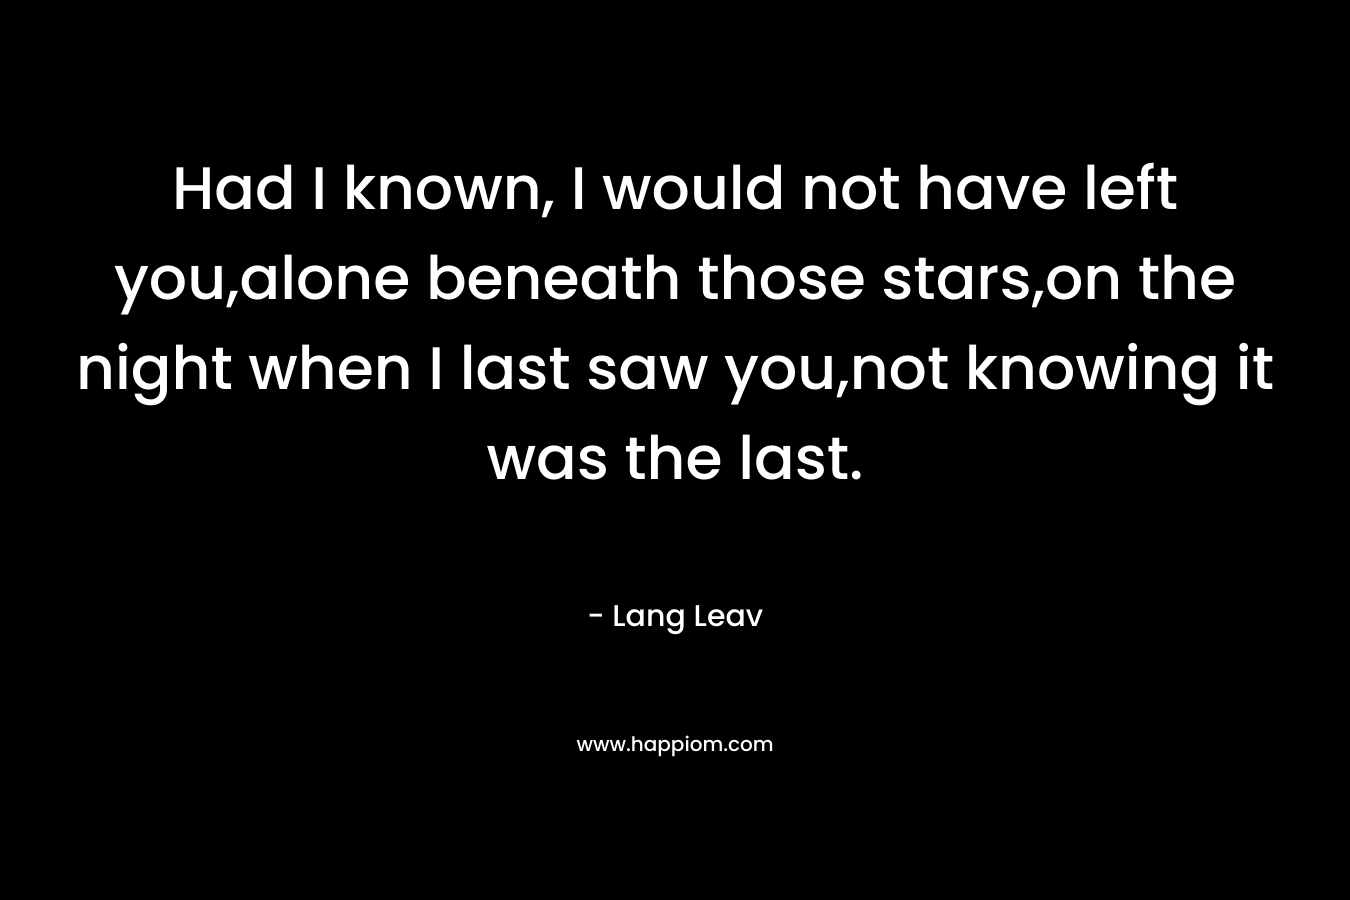 Had I known, I would not have left you,alone beneath those stars,on the night when I last saw you,not knowing it was the last. – Lang Leav